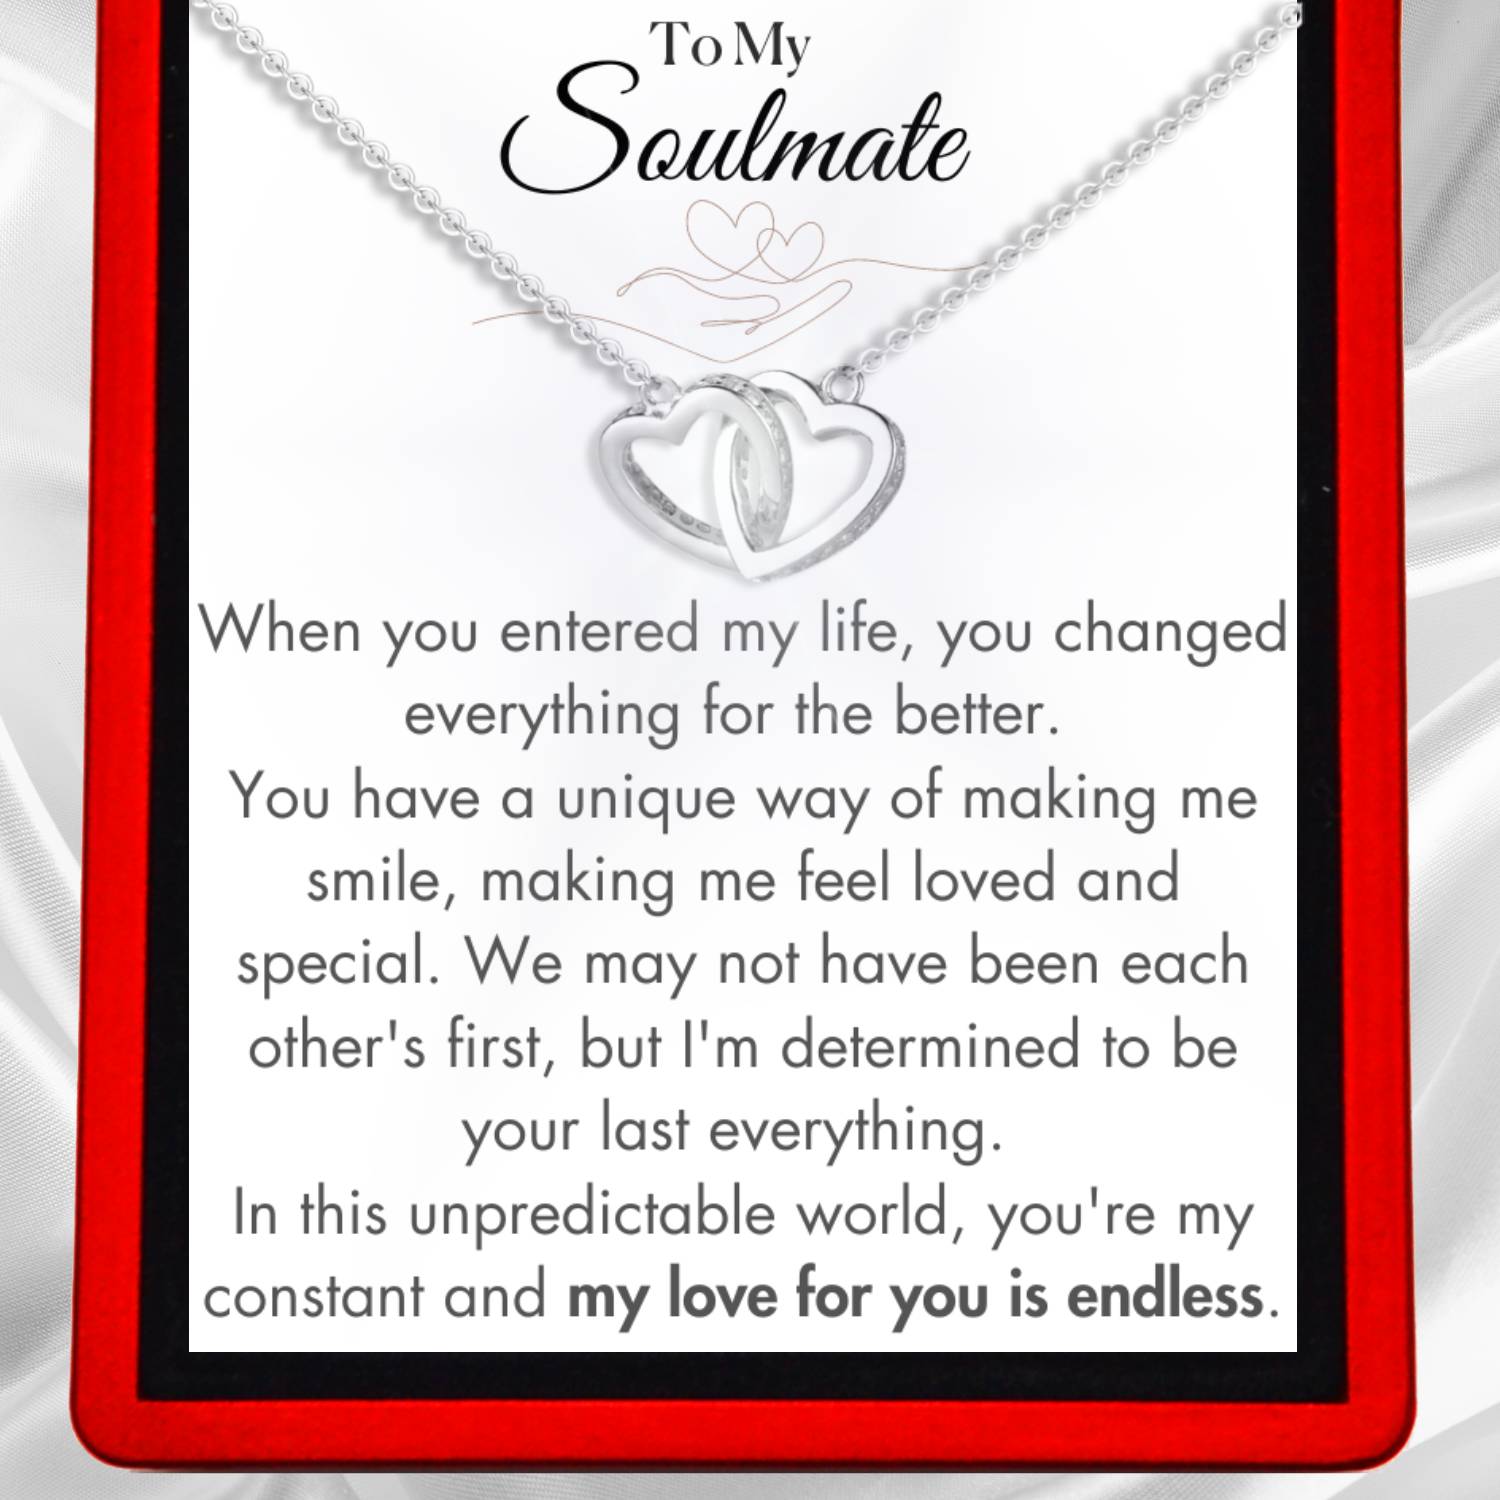 To My Soulmate 'My Constant' - Interlocking Silver or Gold Vermeil Hearts Necklace ST22